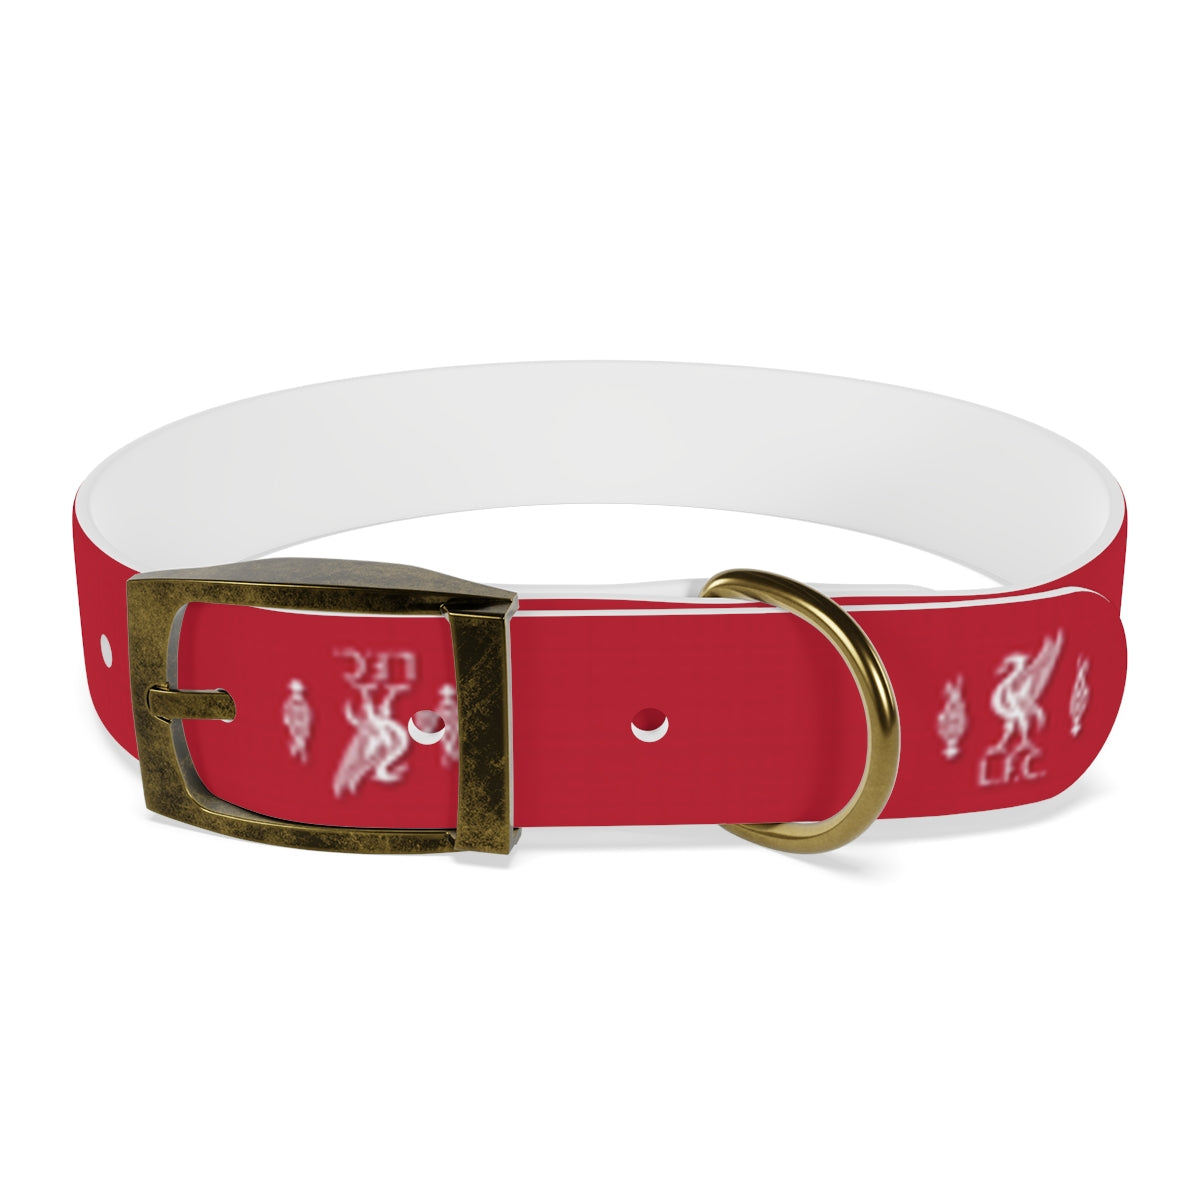 Liverpool FC 23 Home Waterproof Collar - 3 Red Rovers